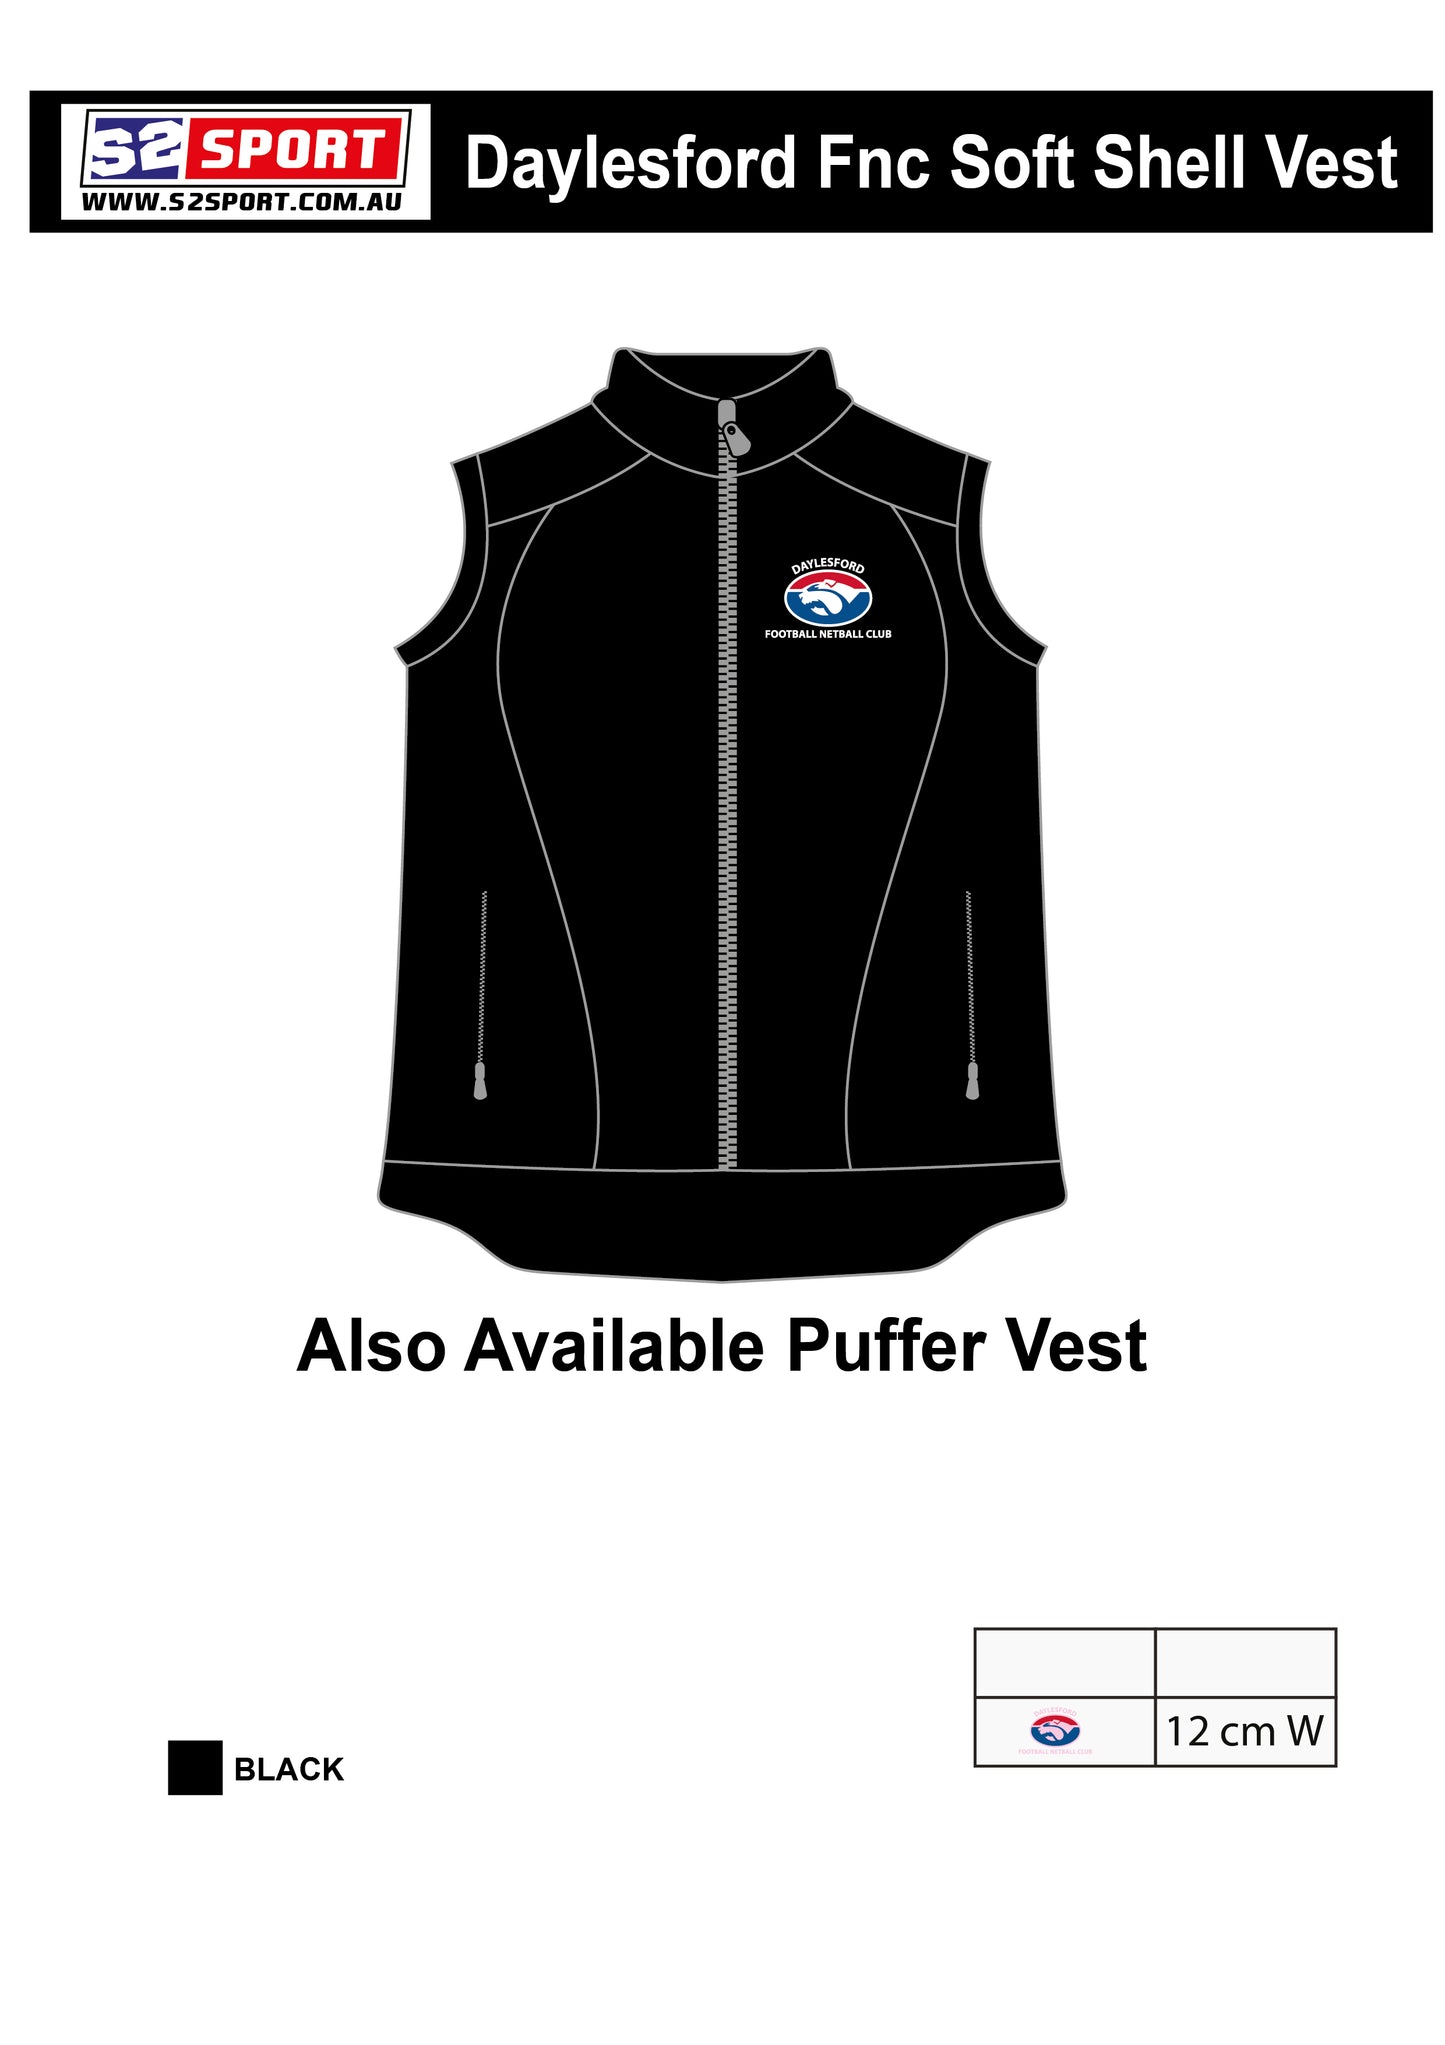 Daylesford Football and Netball Club Jacket & Vest (Puffer / Soft shell)